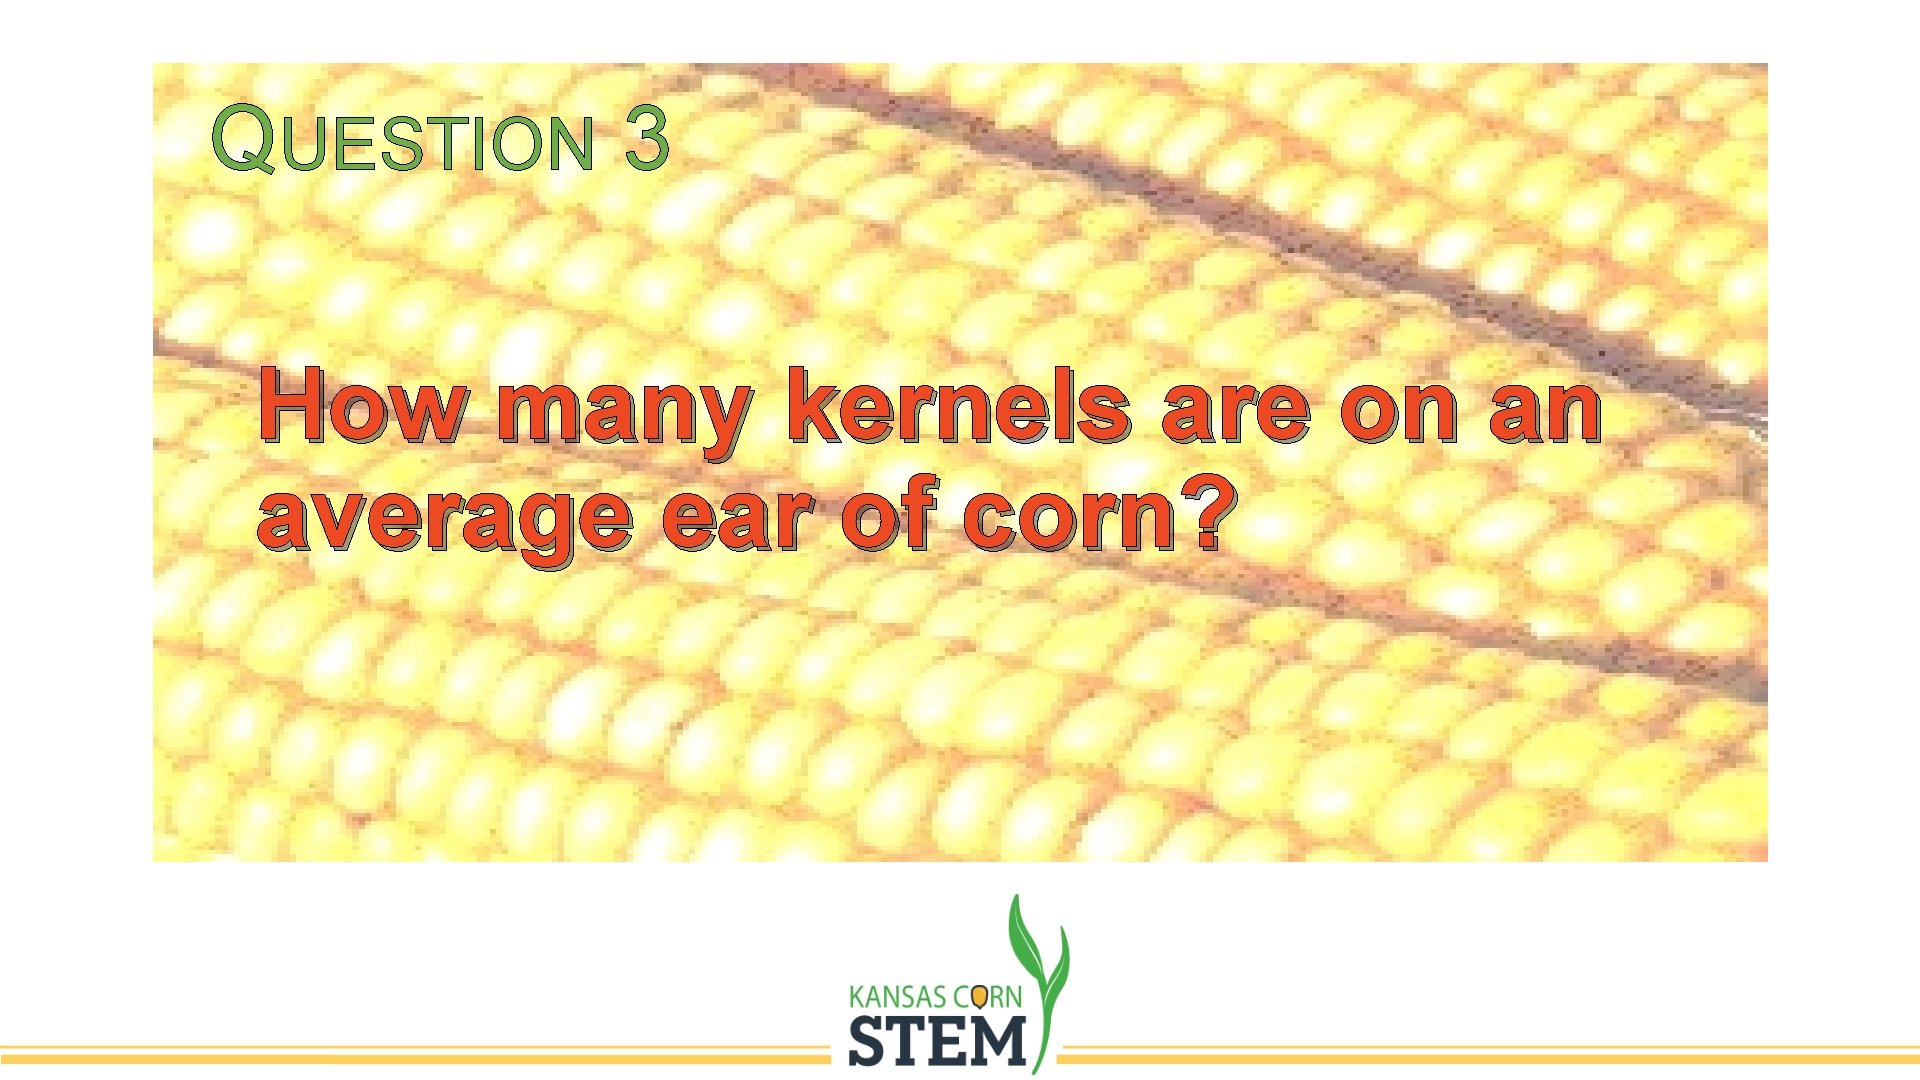 QUESTION 3 How many kernels are on an average ear of corn? 